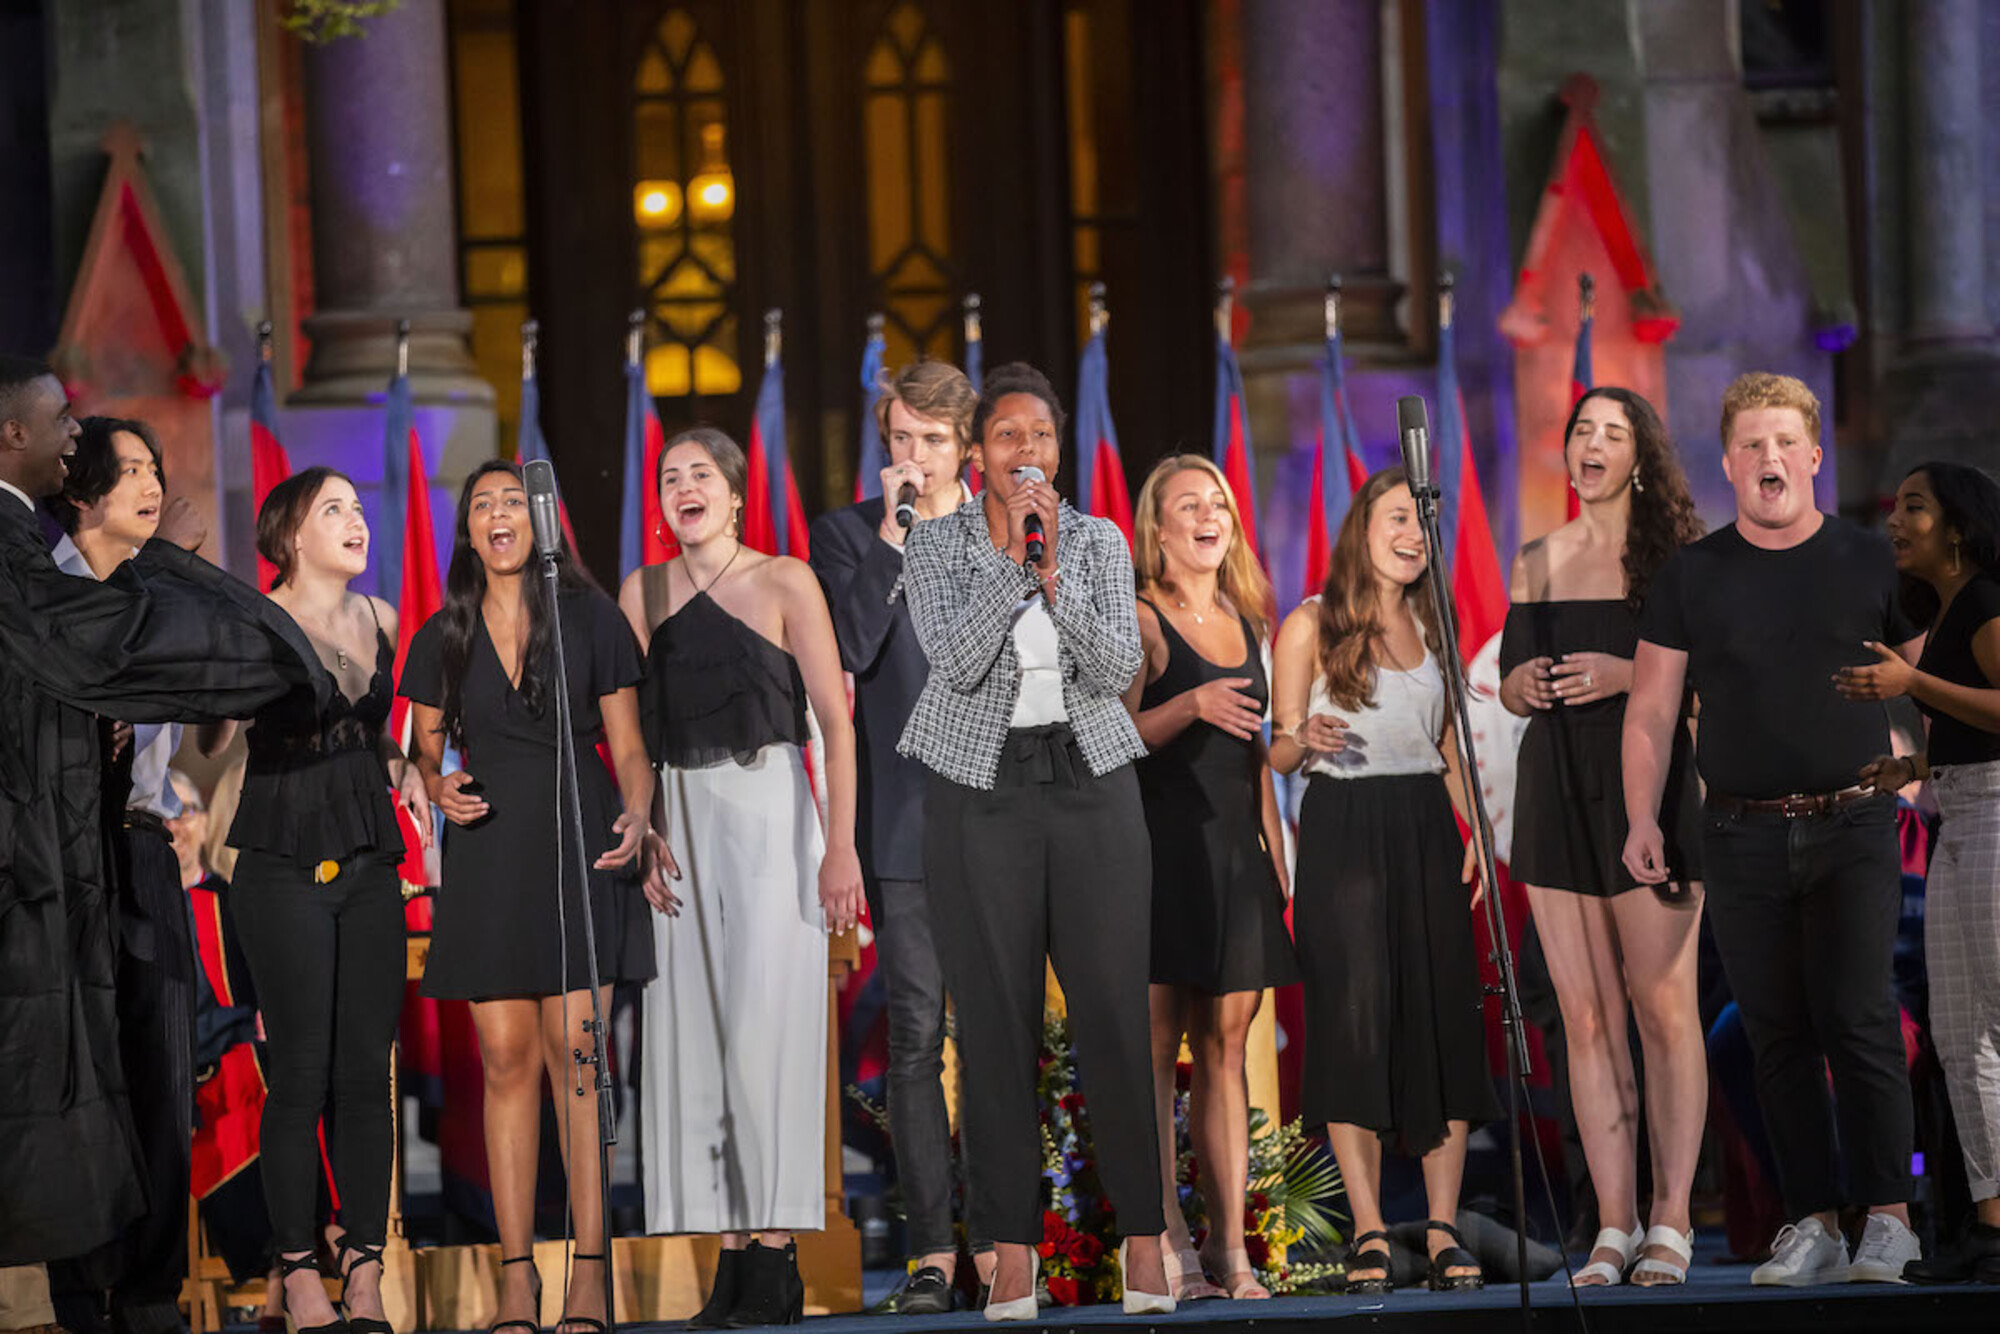 student groups singing on stage at convocation 2019